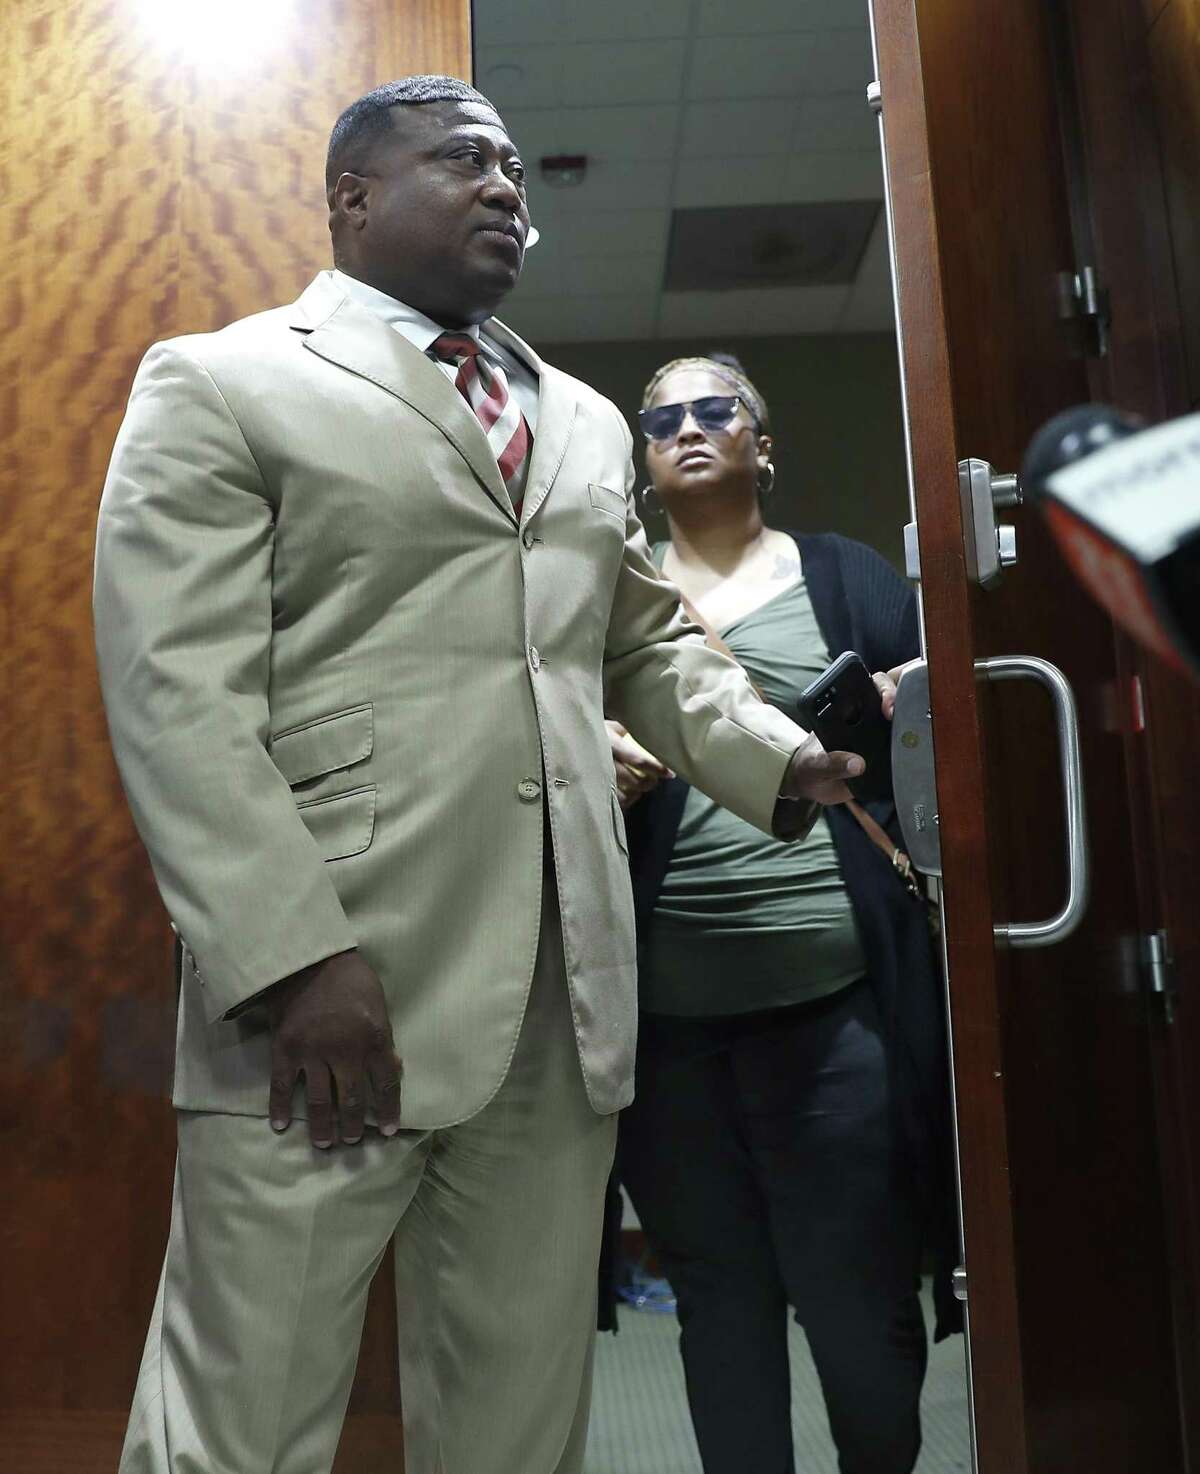 Quanell X walks out of the courtroom with Brittany Bowens, the mother of the missing 4-year-old, Maleah Davis after the court postponed a court appearance for Derion Vence, who is charged with tampering with evidence in the case of Maleah Davis' disappearance, Monday, May 13, 2019, in Houston.